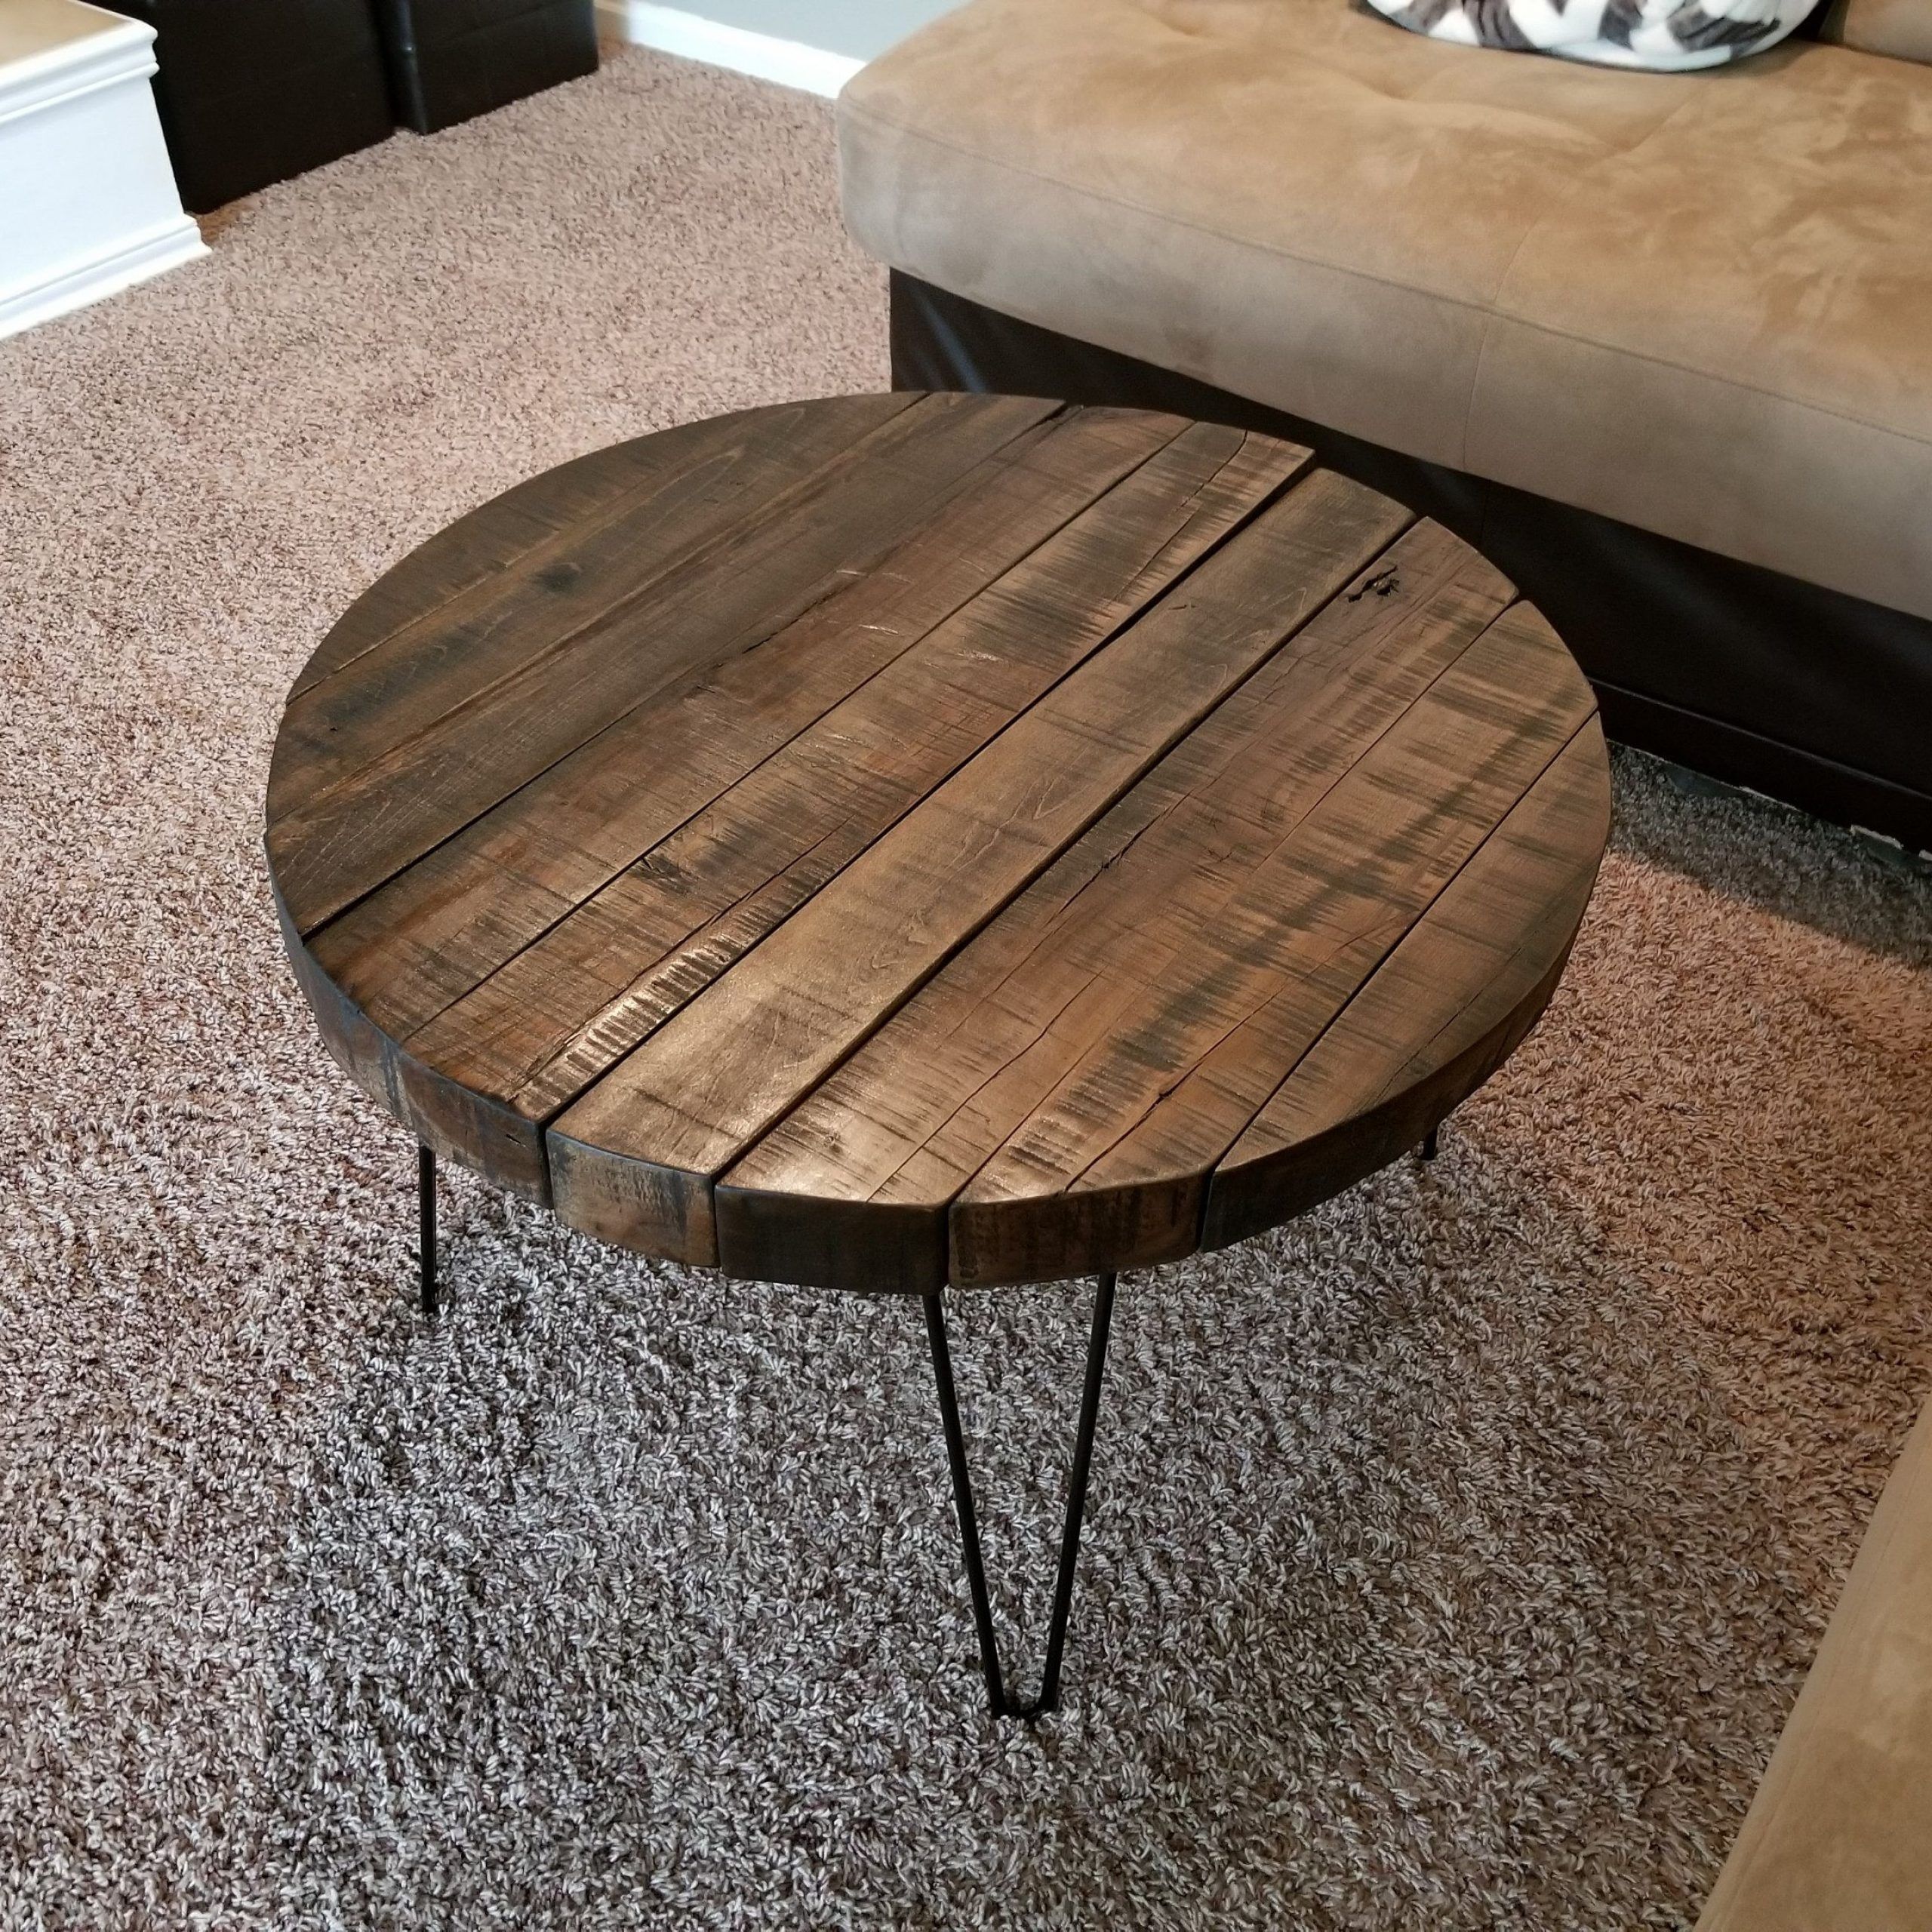 Reclaimed Wood Round Coffee Table With Hairpin Legs Regarding Current Round Hairpin Leg Dining Tables (View 12 of 15)